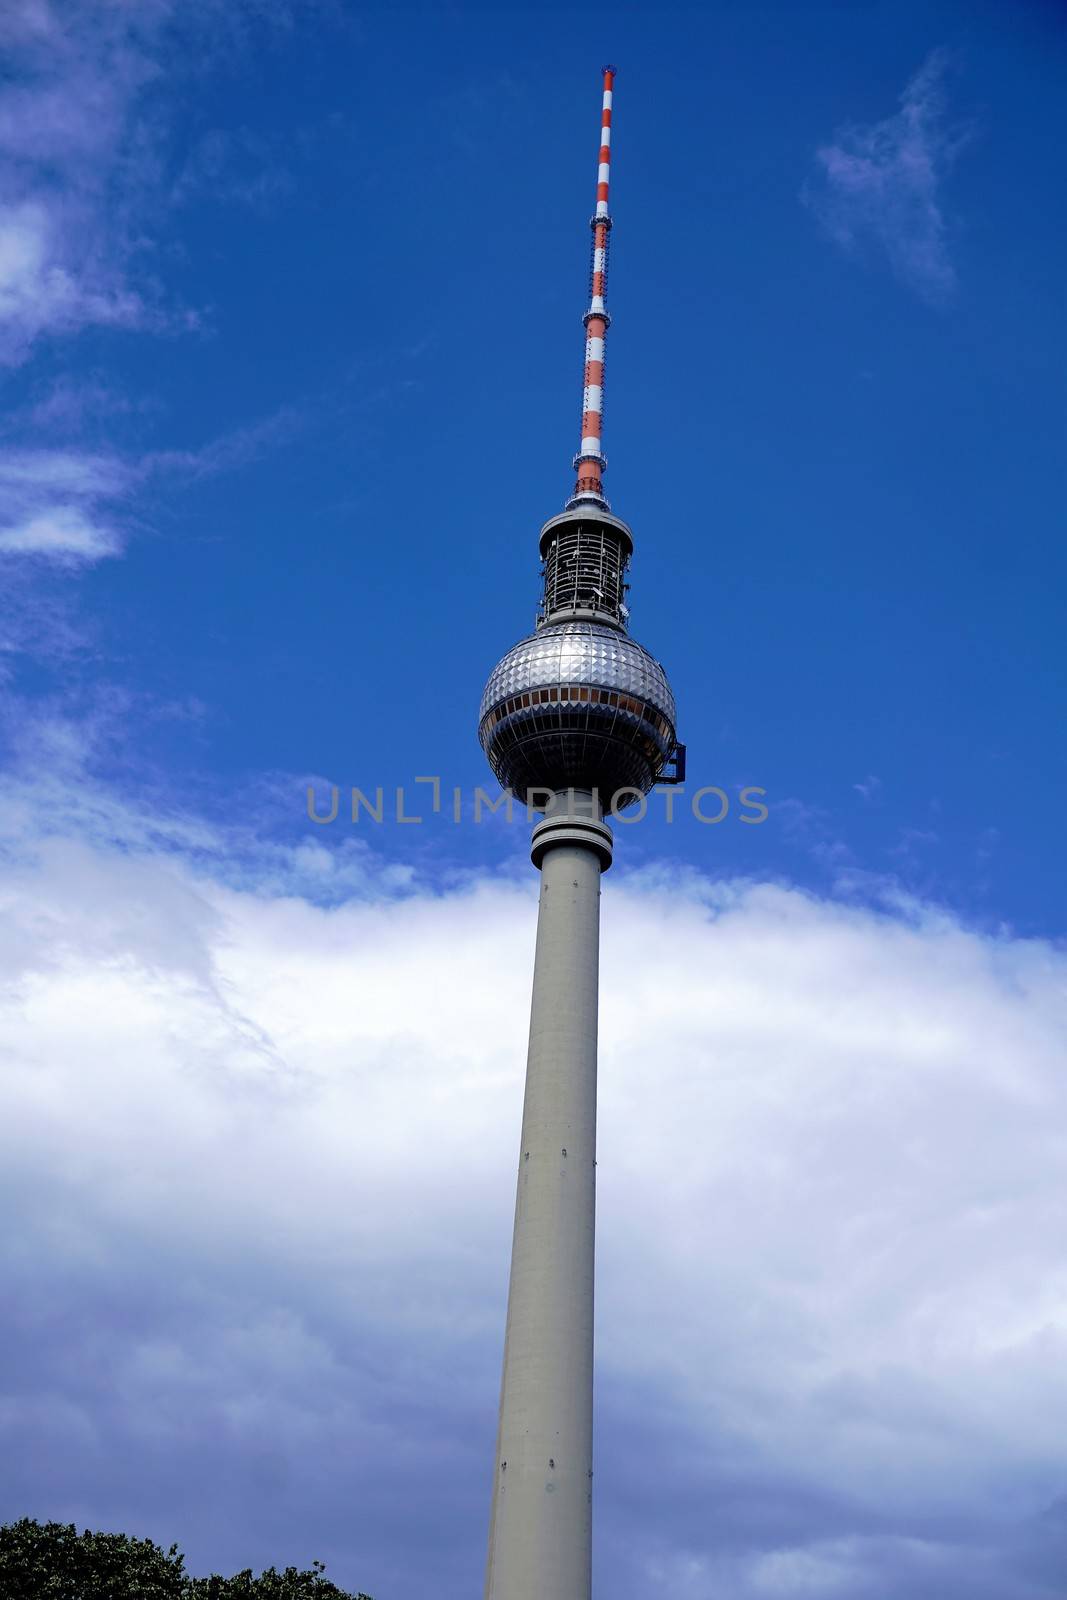 Berlin television tower in front of blue sky with clouds and trees